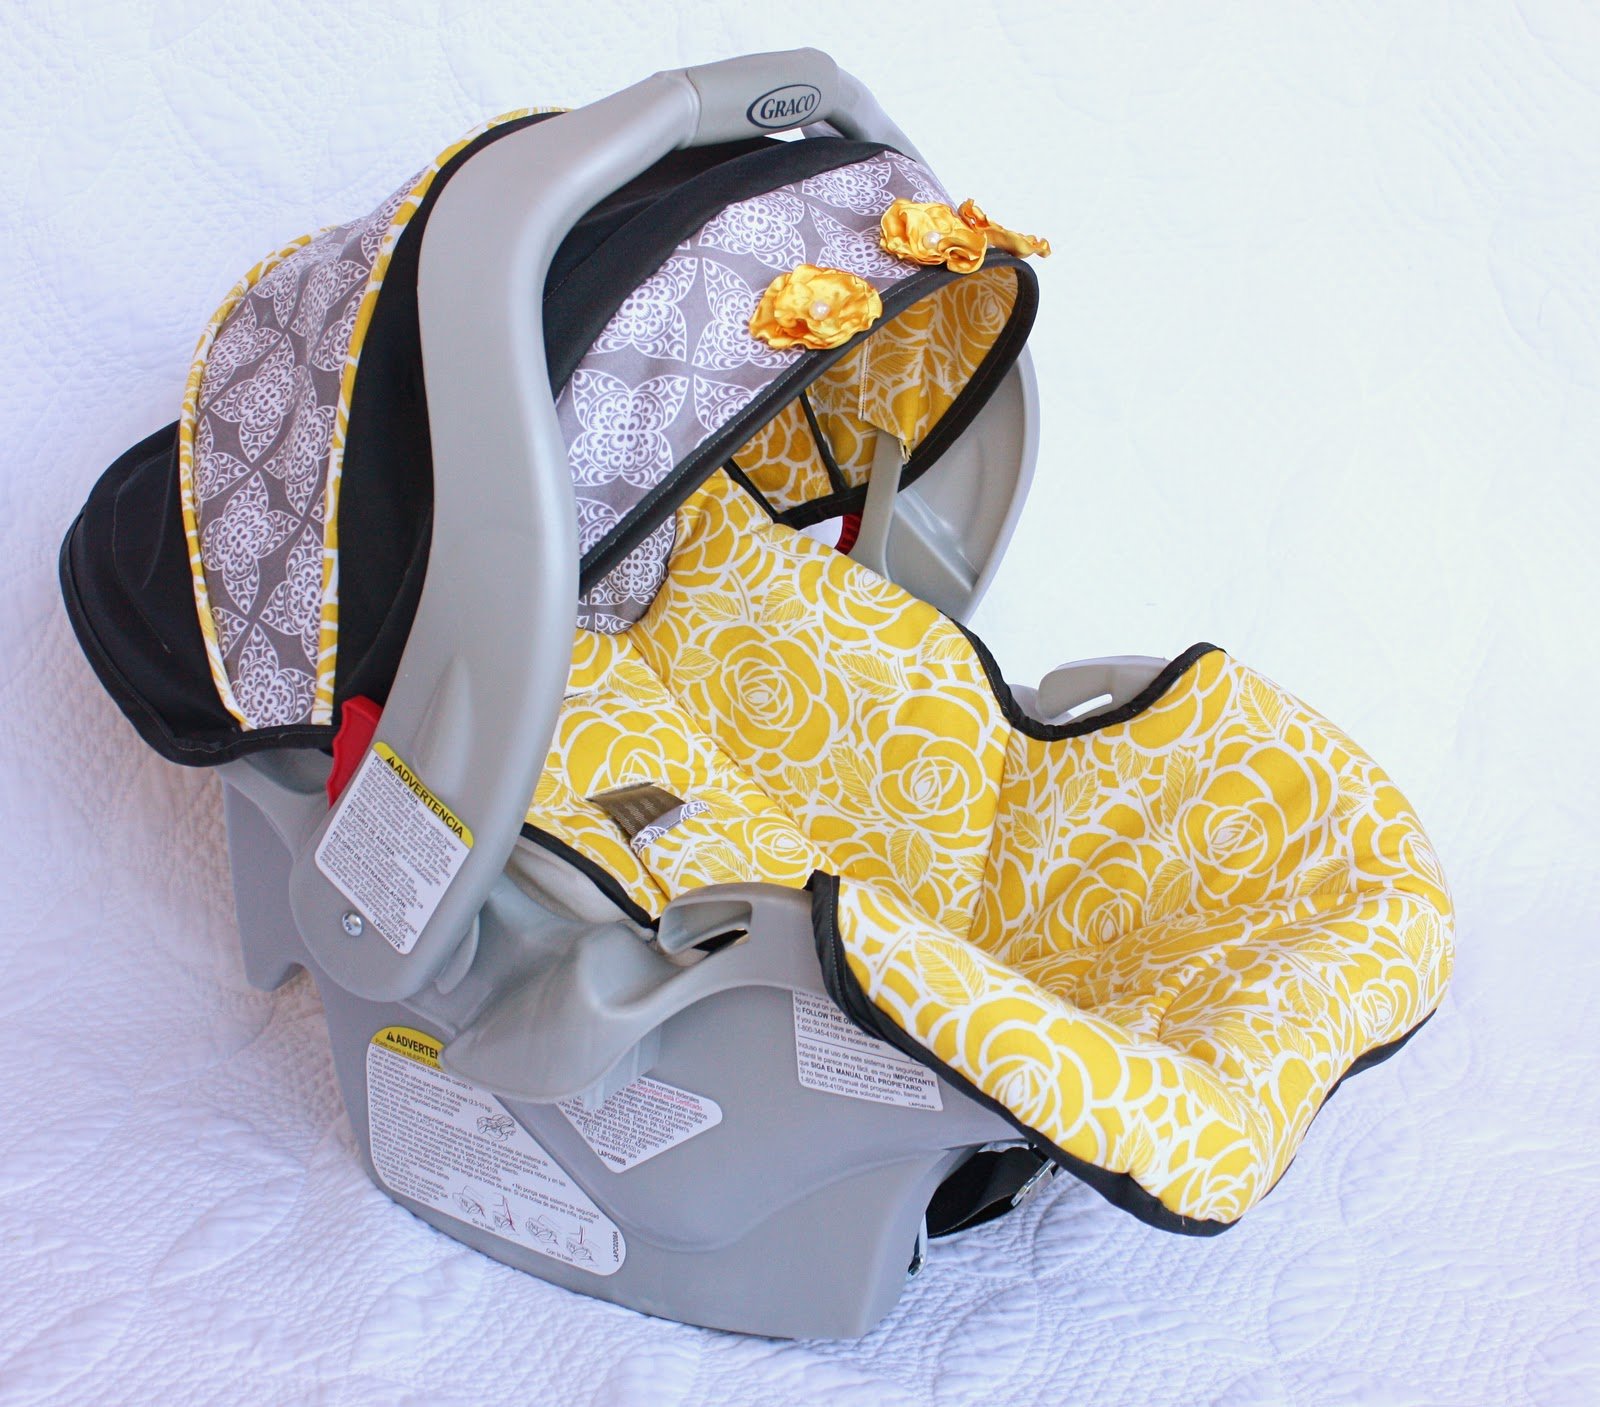 Infant Car Seat Covers – What To Look For